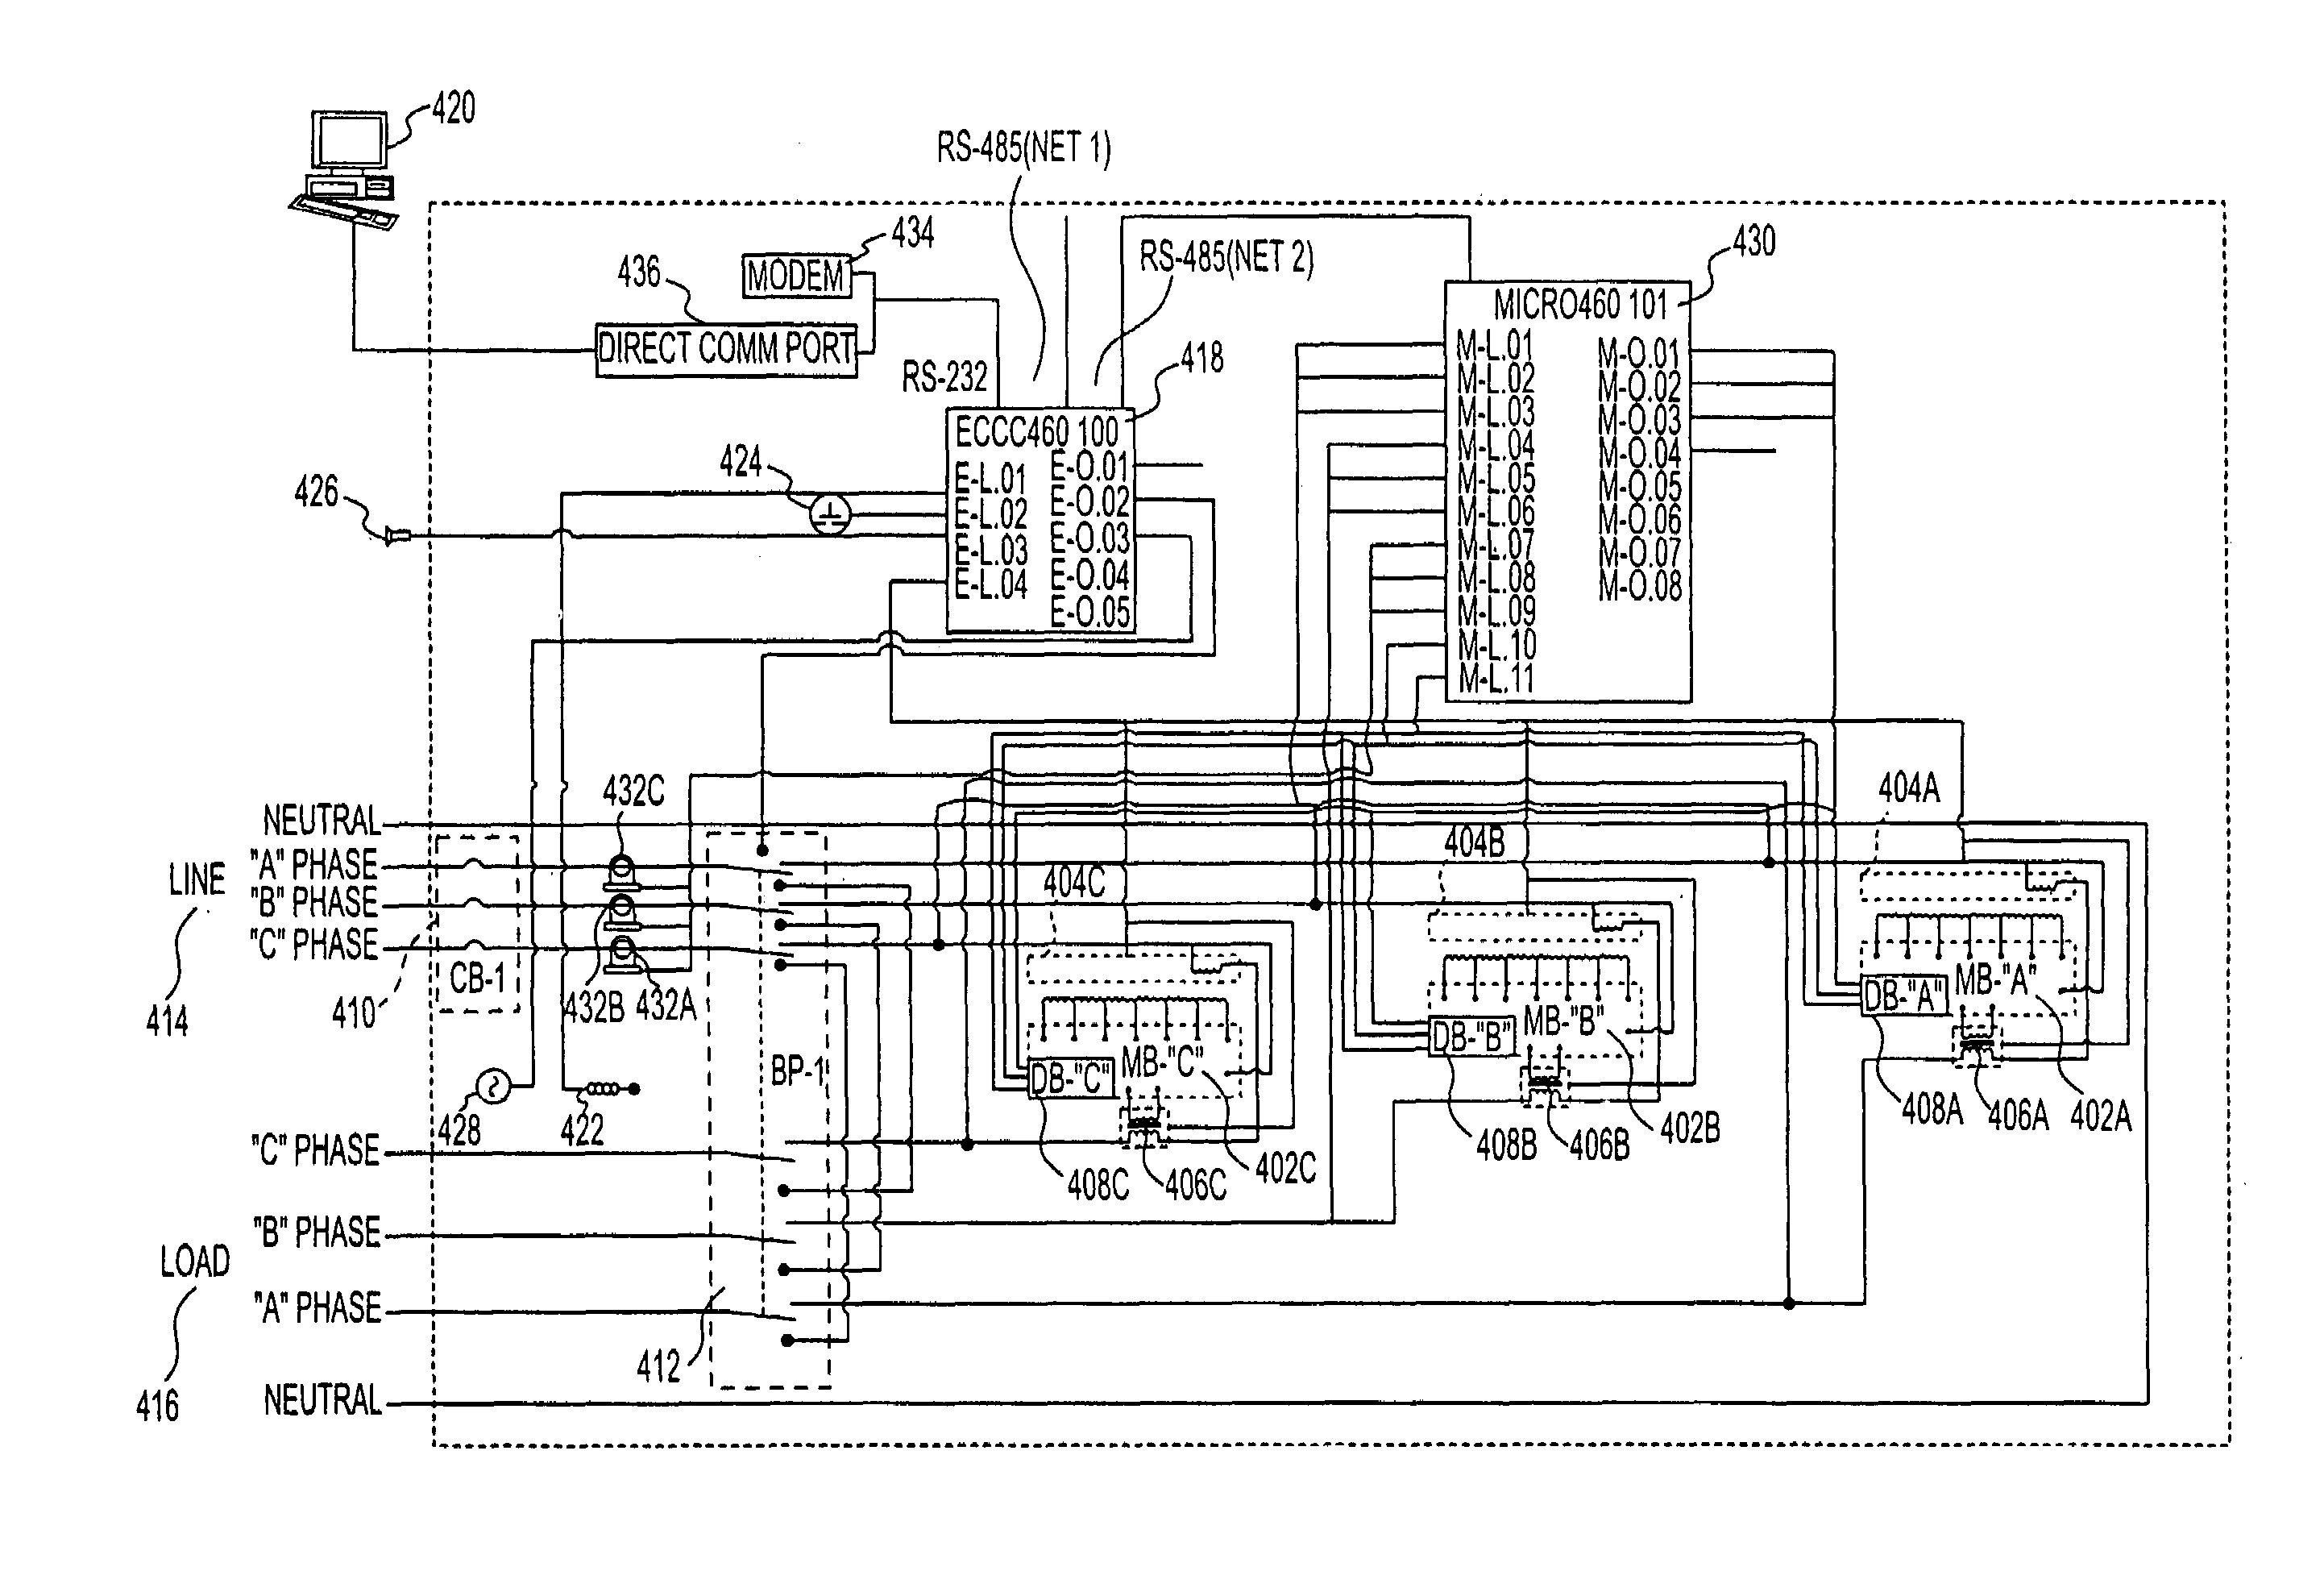 Electrical power distribution system for street lighting